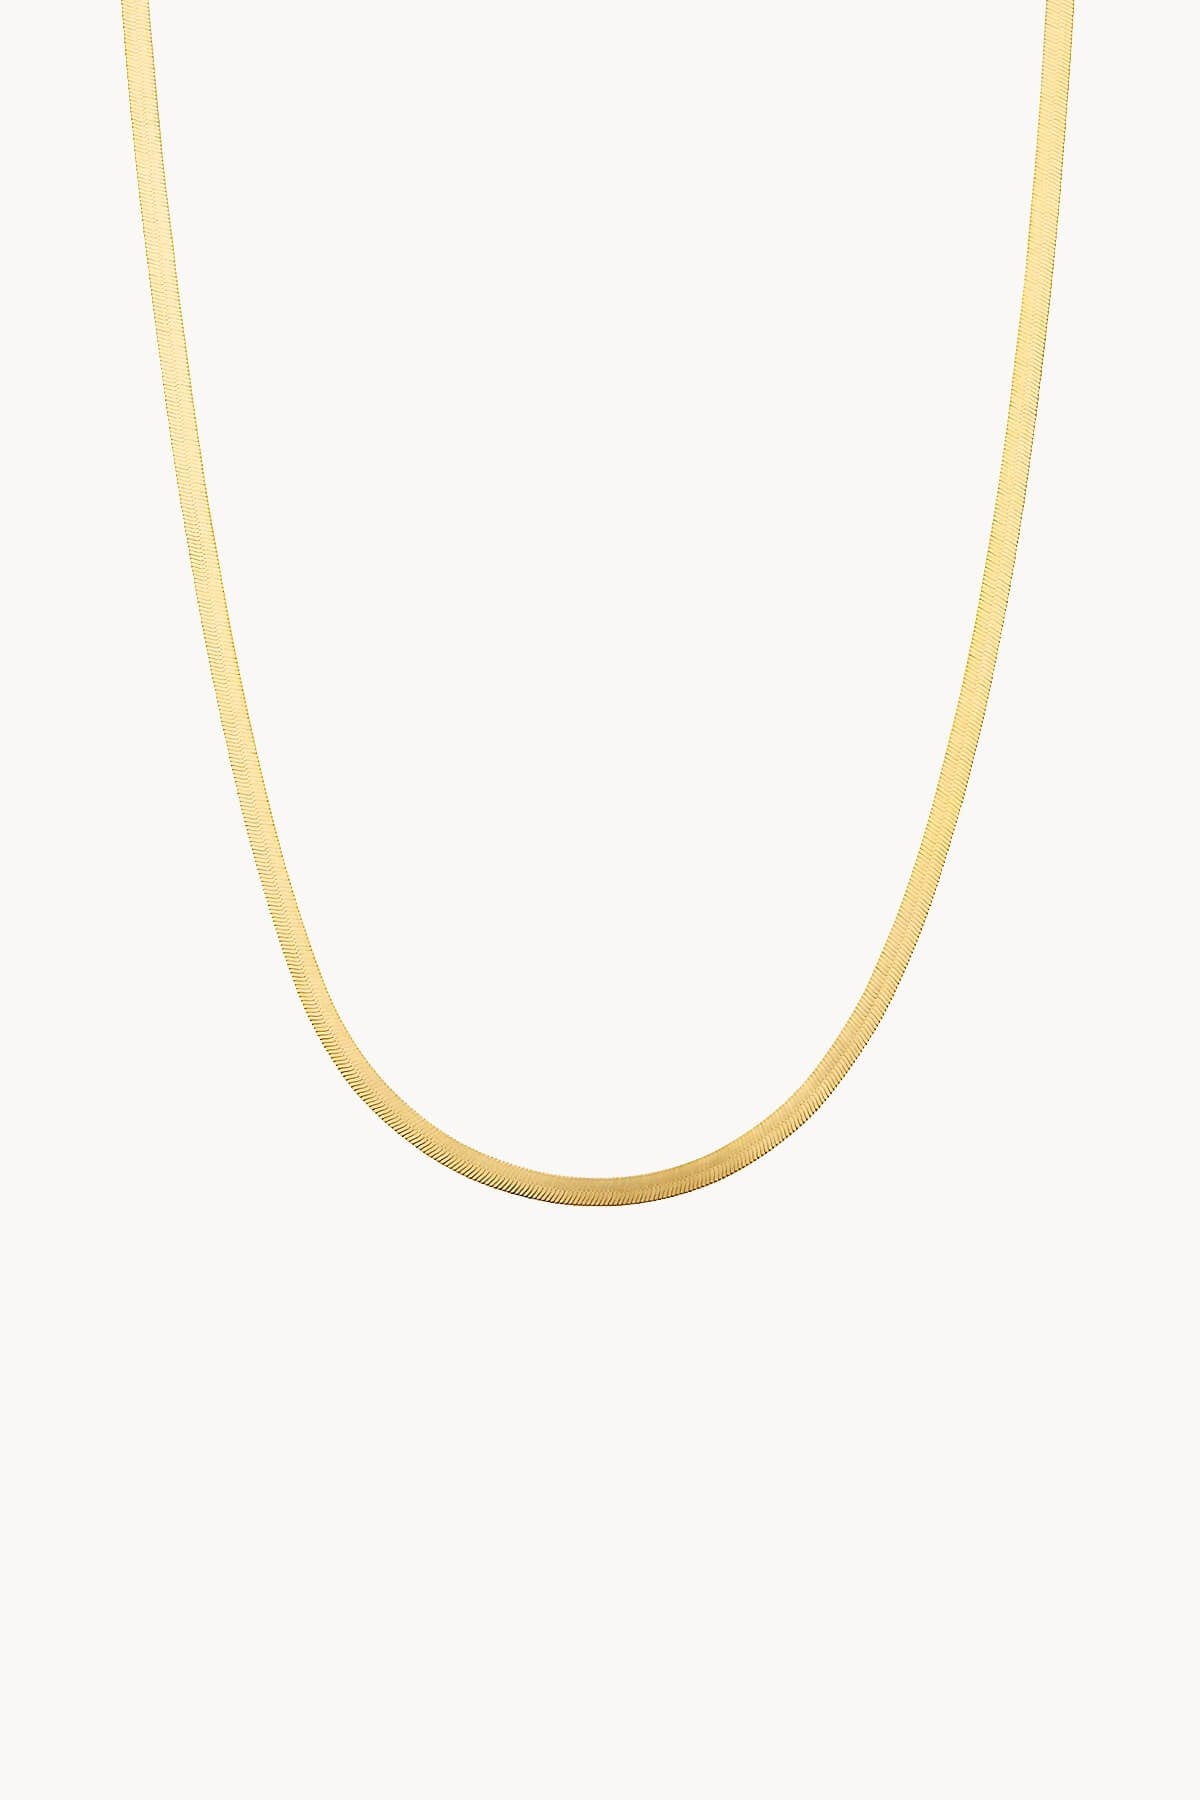 Italian Chain Necklace 925 Sterling Silver 18K Gold Plated